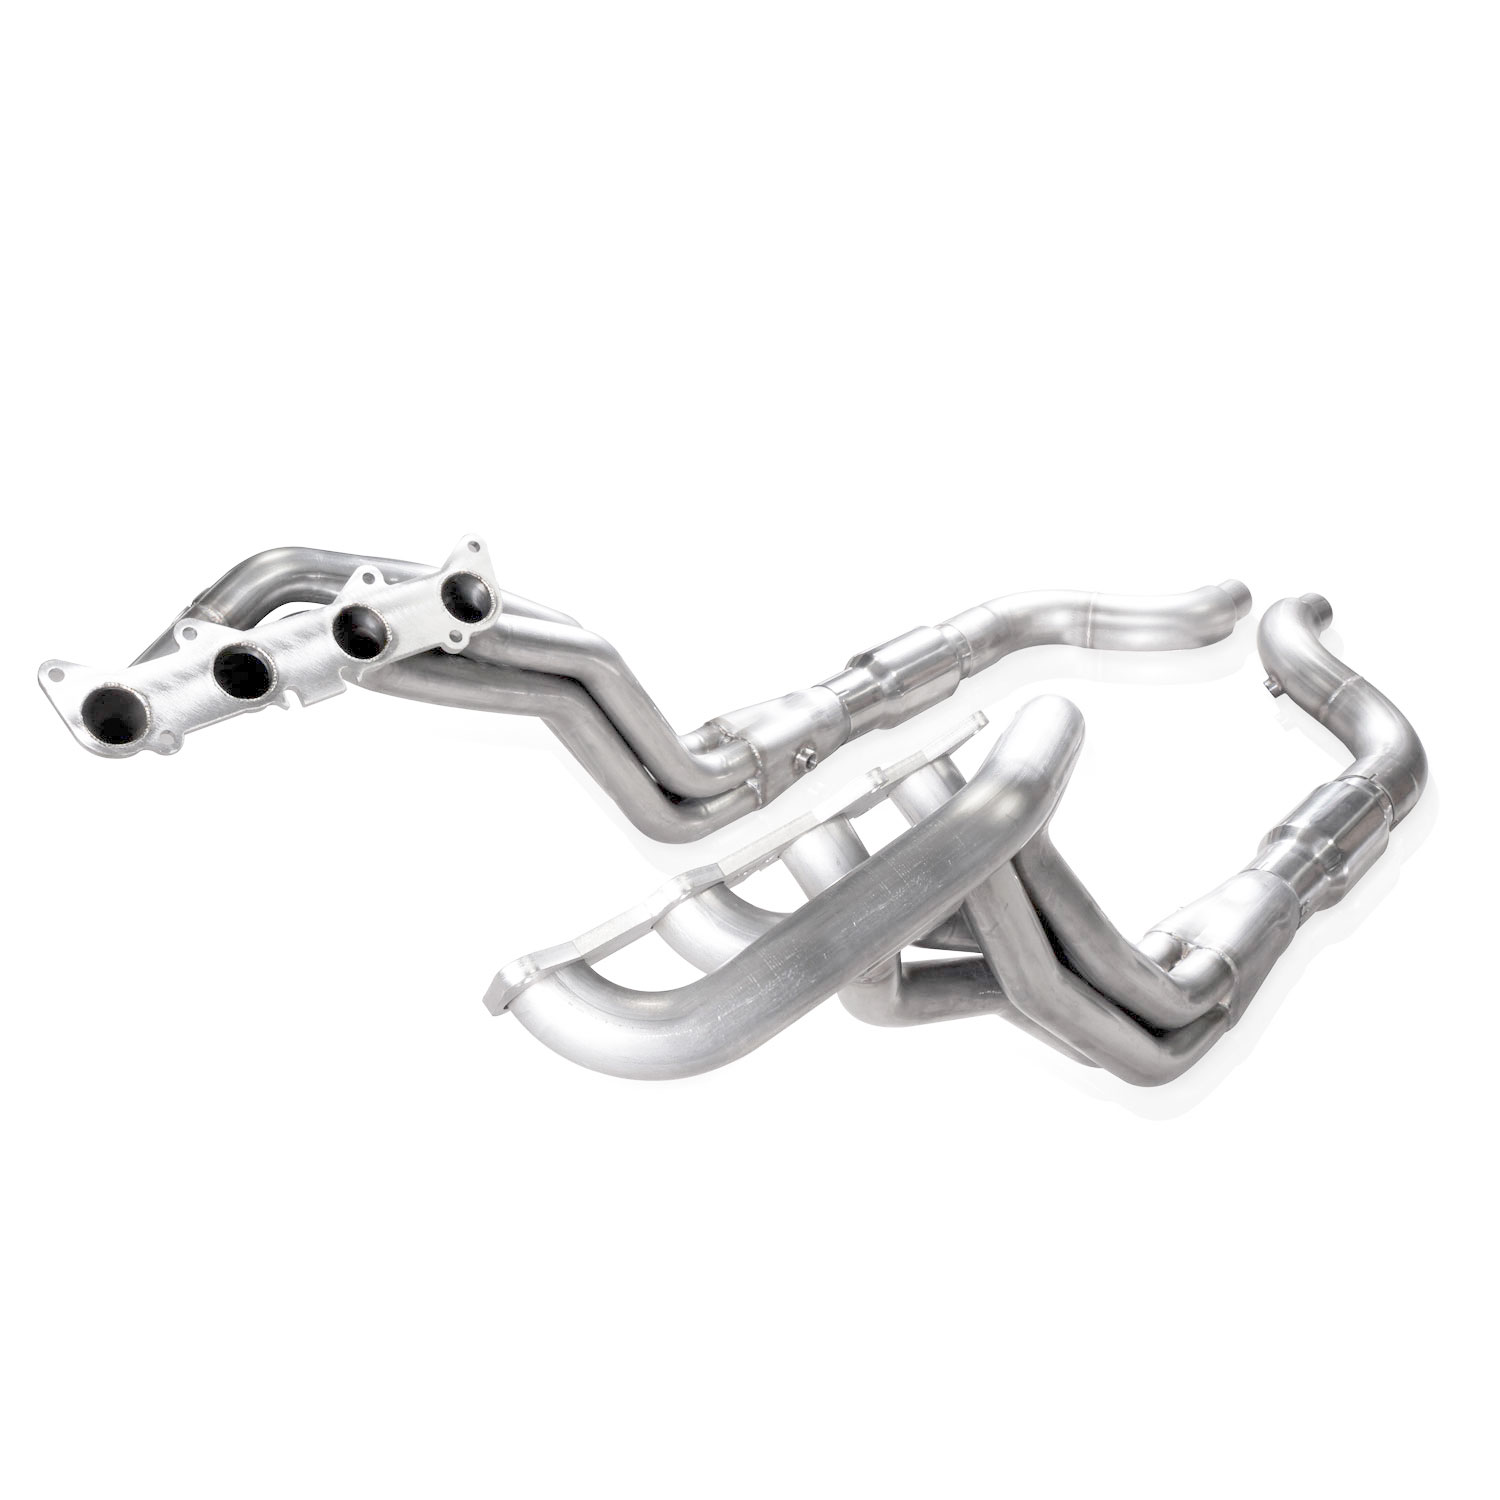 2015-2021 Mustang GT 5.0L Stainless Power Headers 1-7/8" With Catted Leads Factory Connect